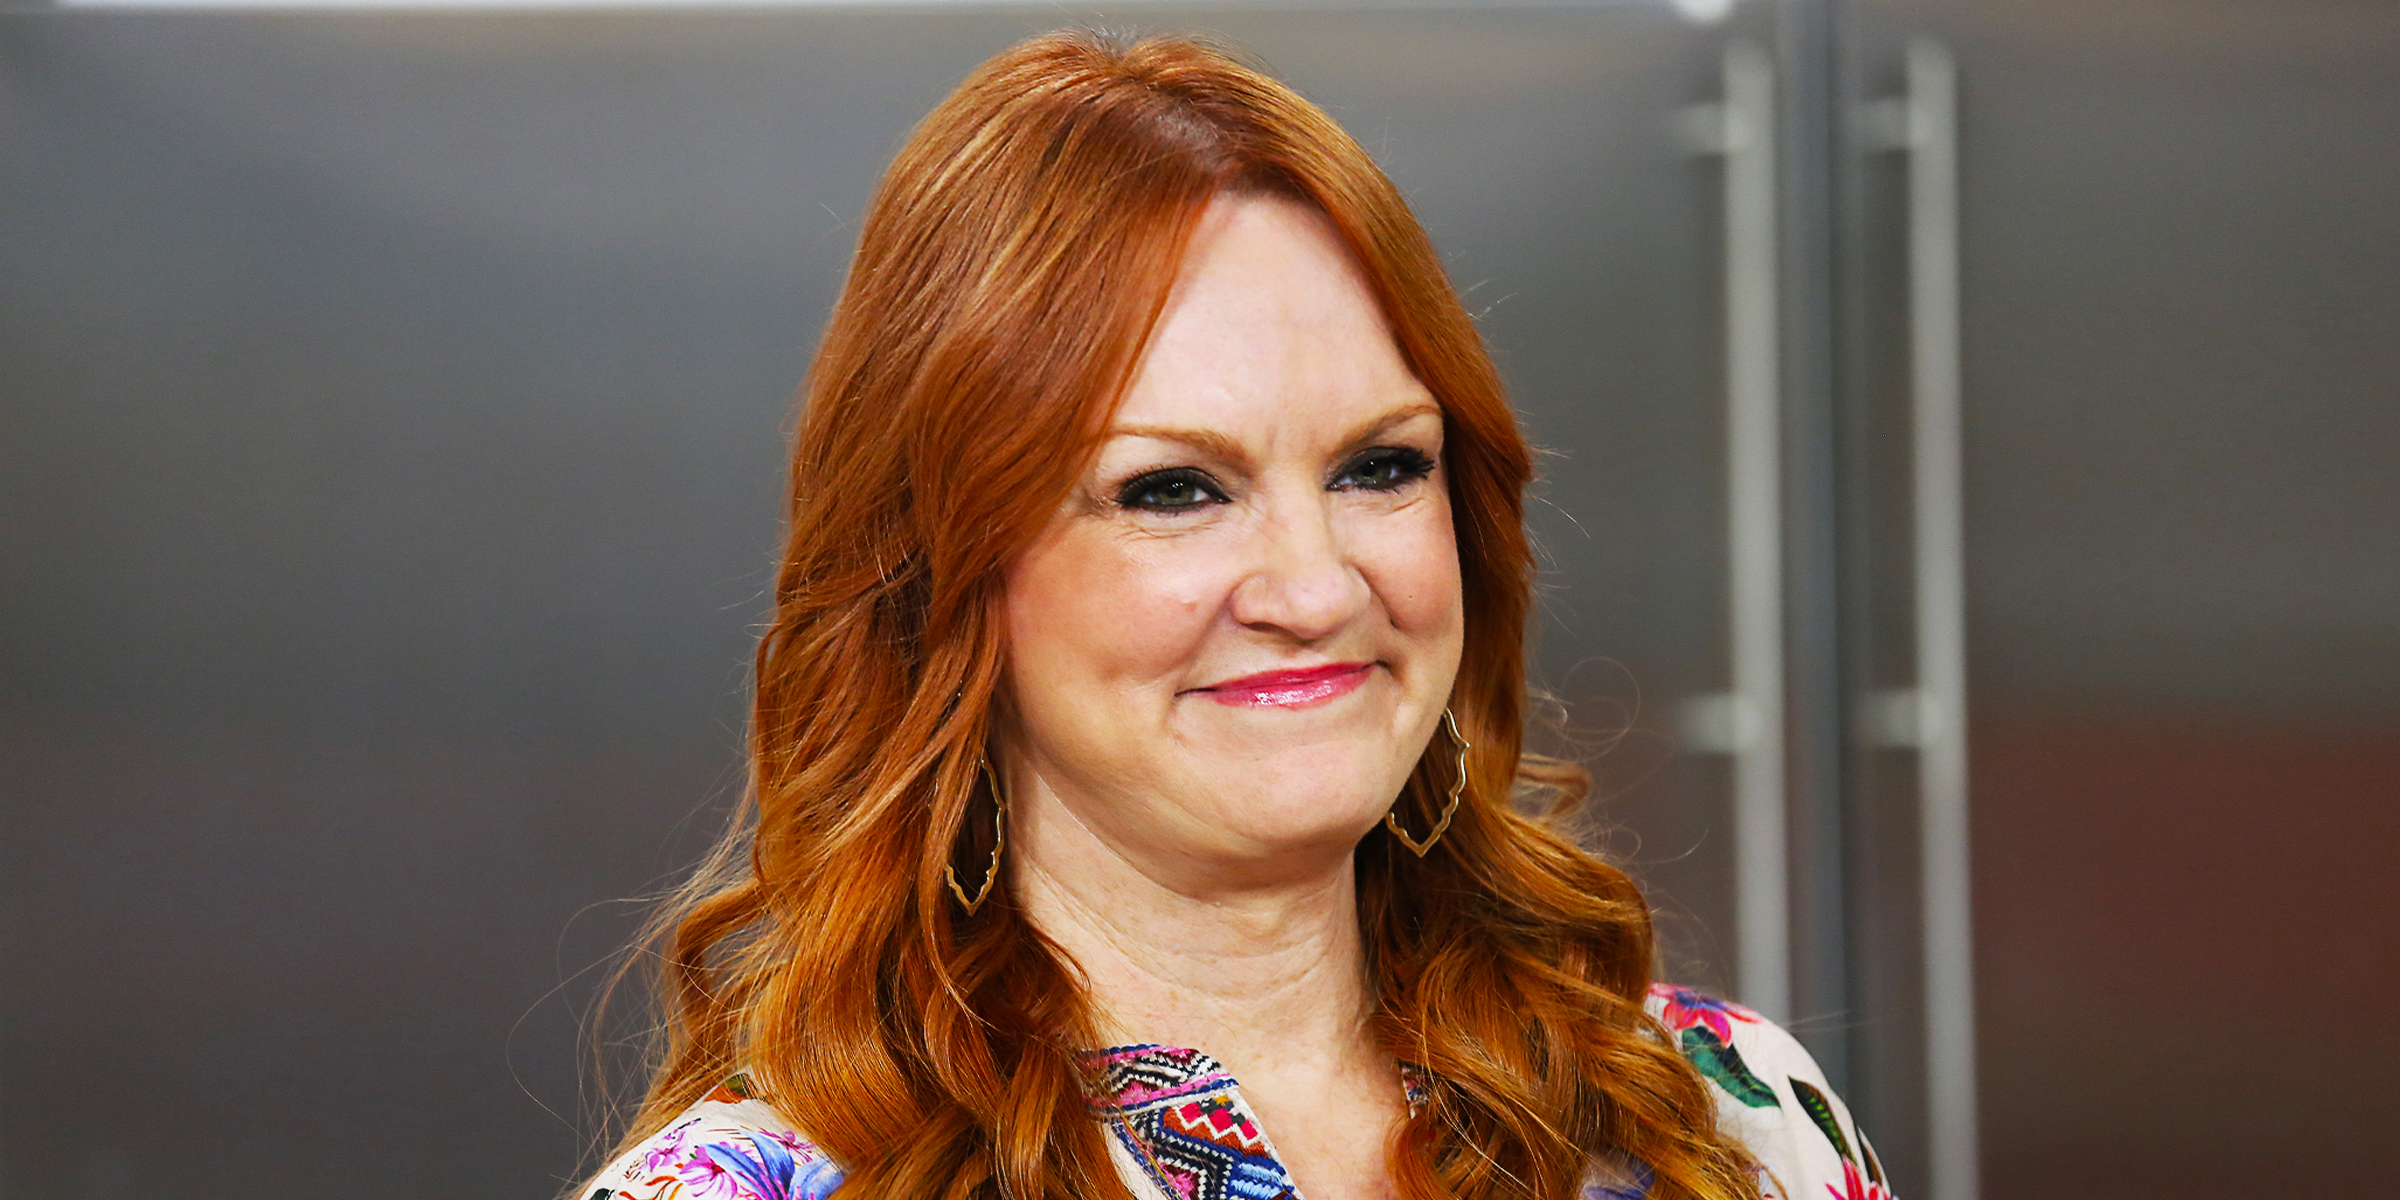 Ree Drummond | Source: Getty Images